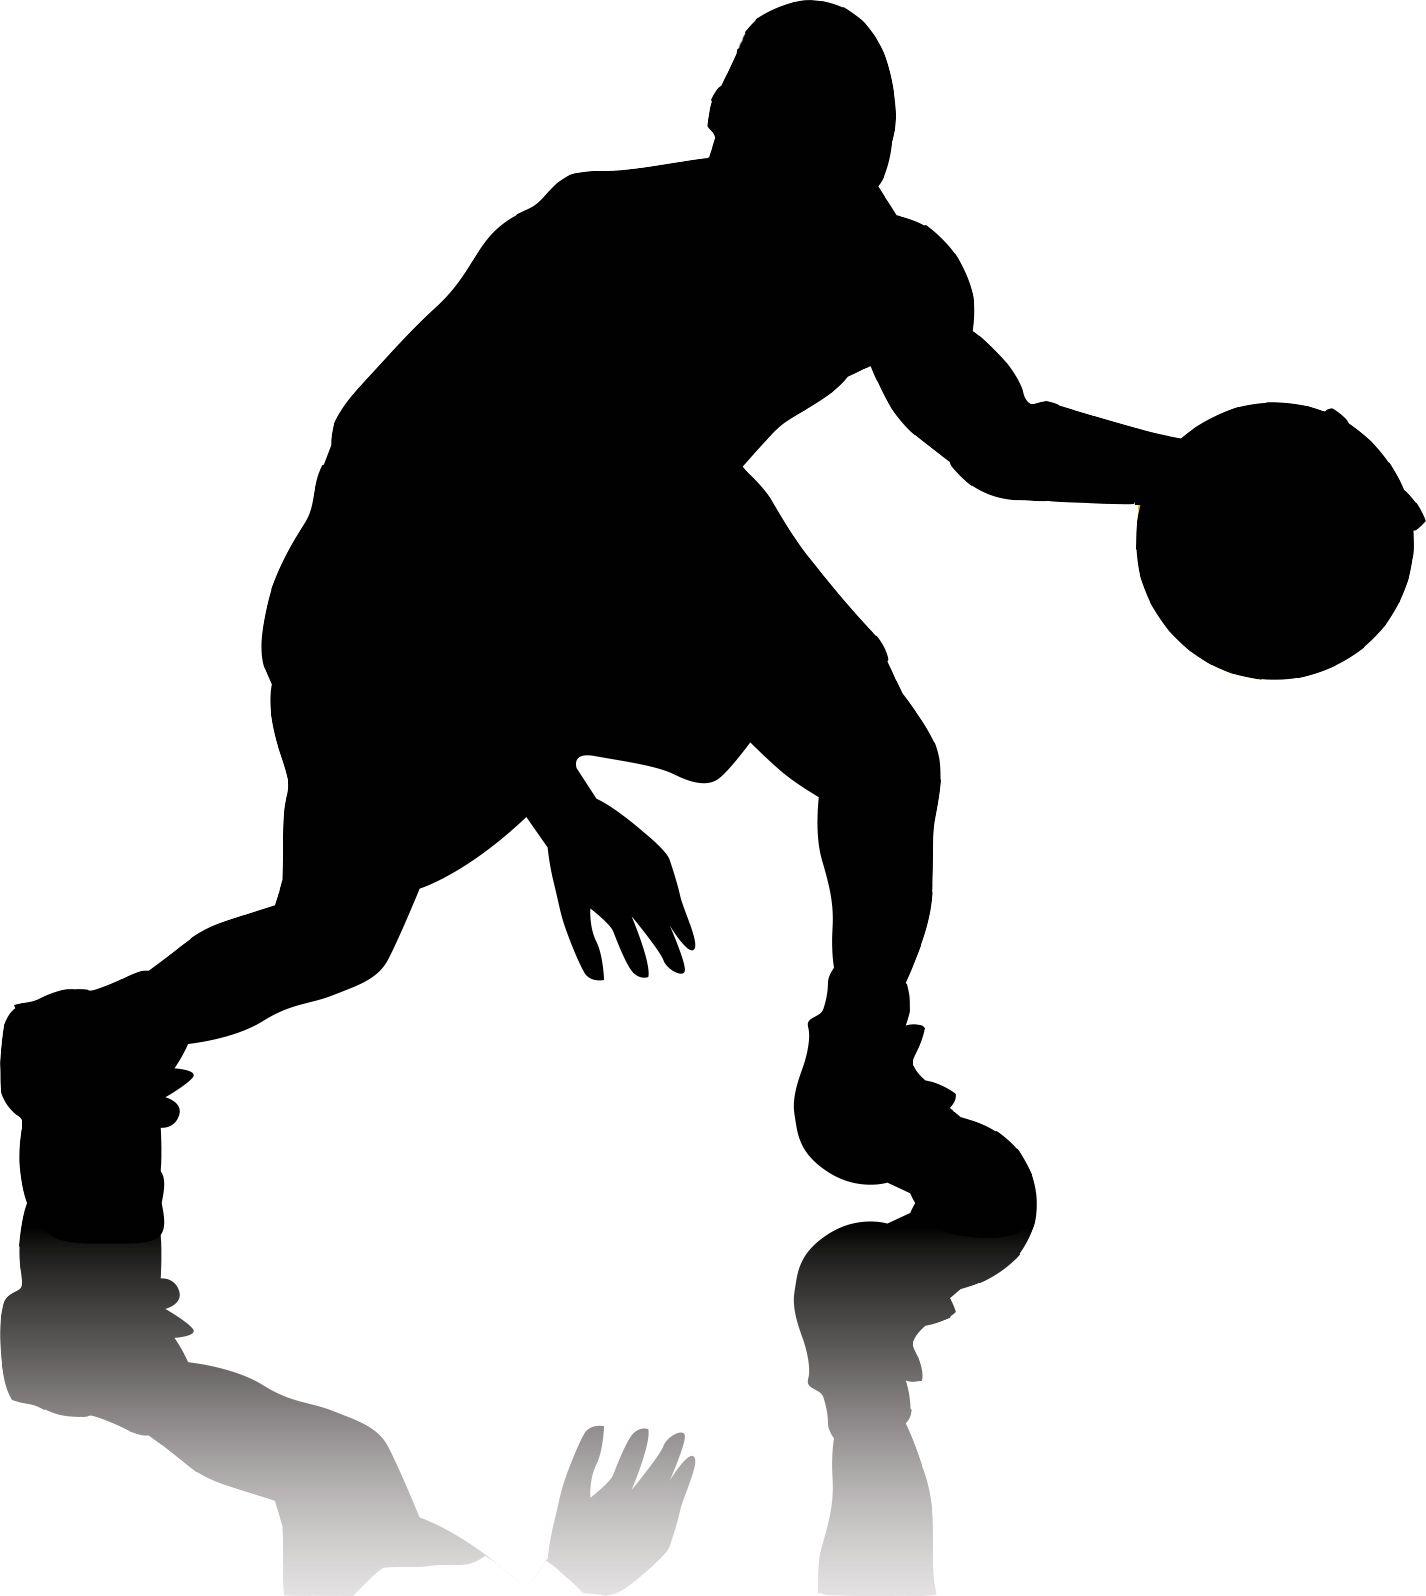 Basketball Player Logo - Free Basketball Outline, Download Free Clip Art, Free Clip Art